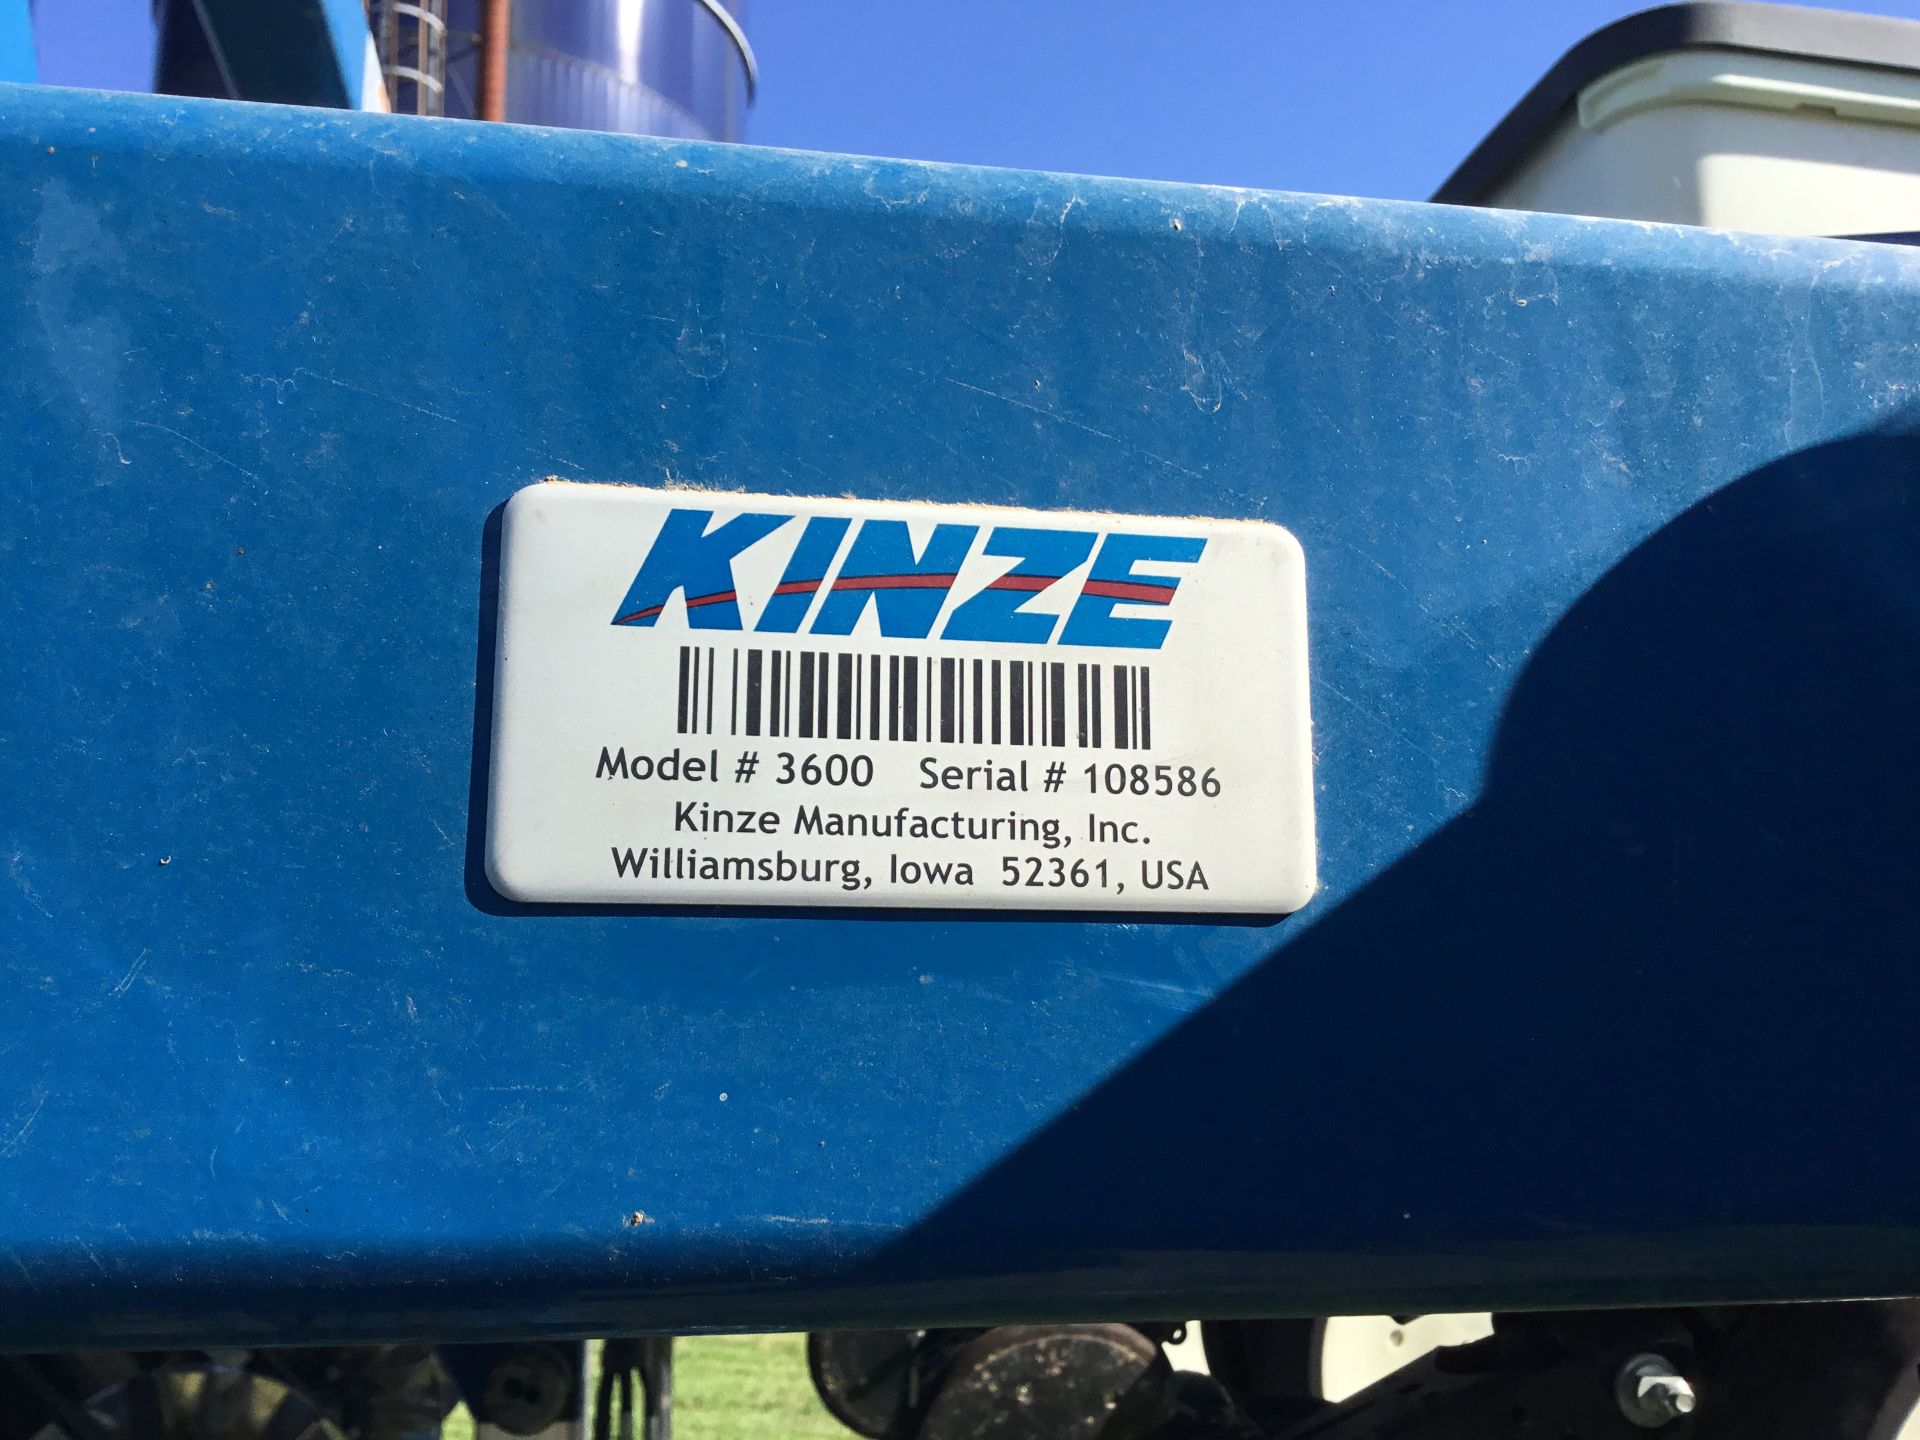 2017 Kinze 3600 12/23, No-Till Coulters, 4 Hvy. Duty Down Pressure Springs, Meter Shaft Speed - Image 2 of 13